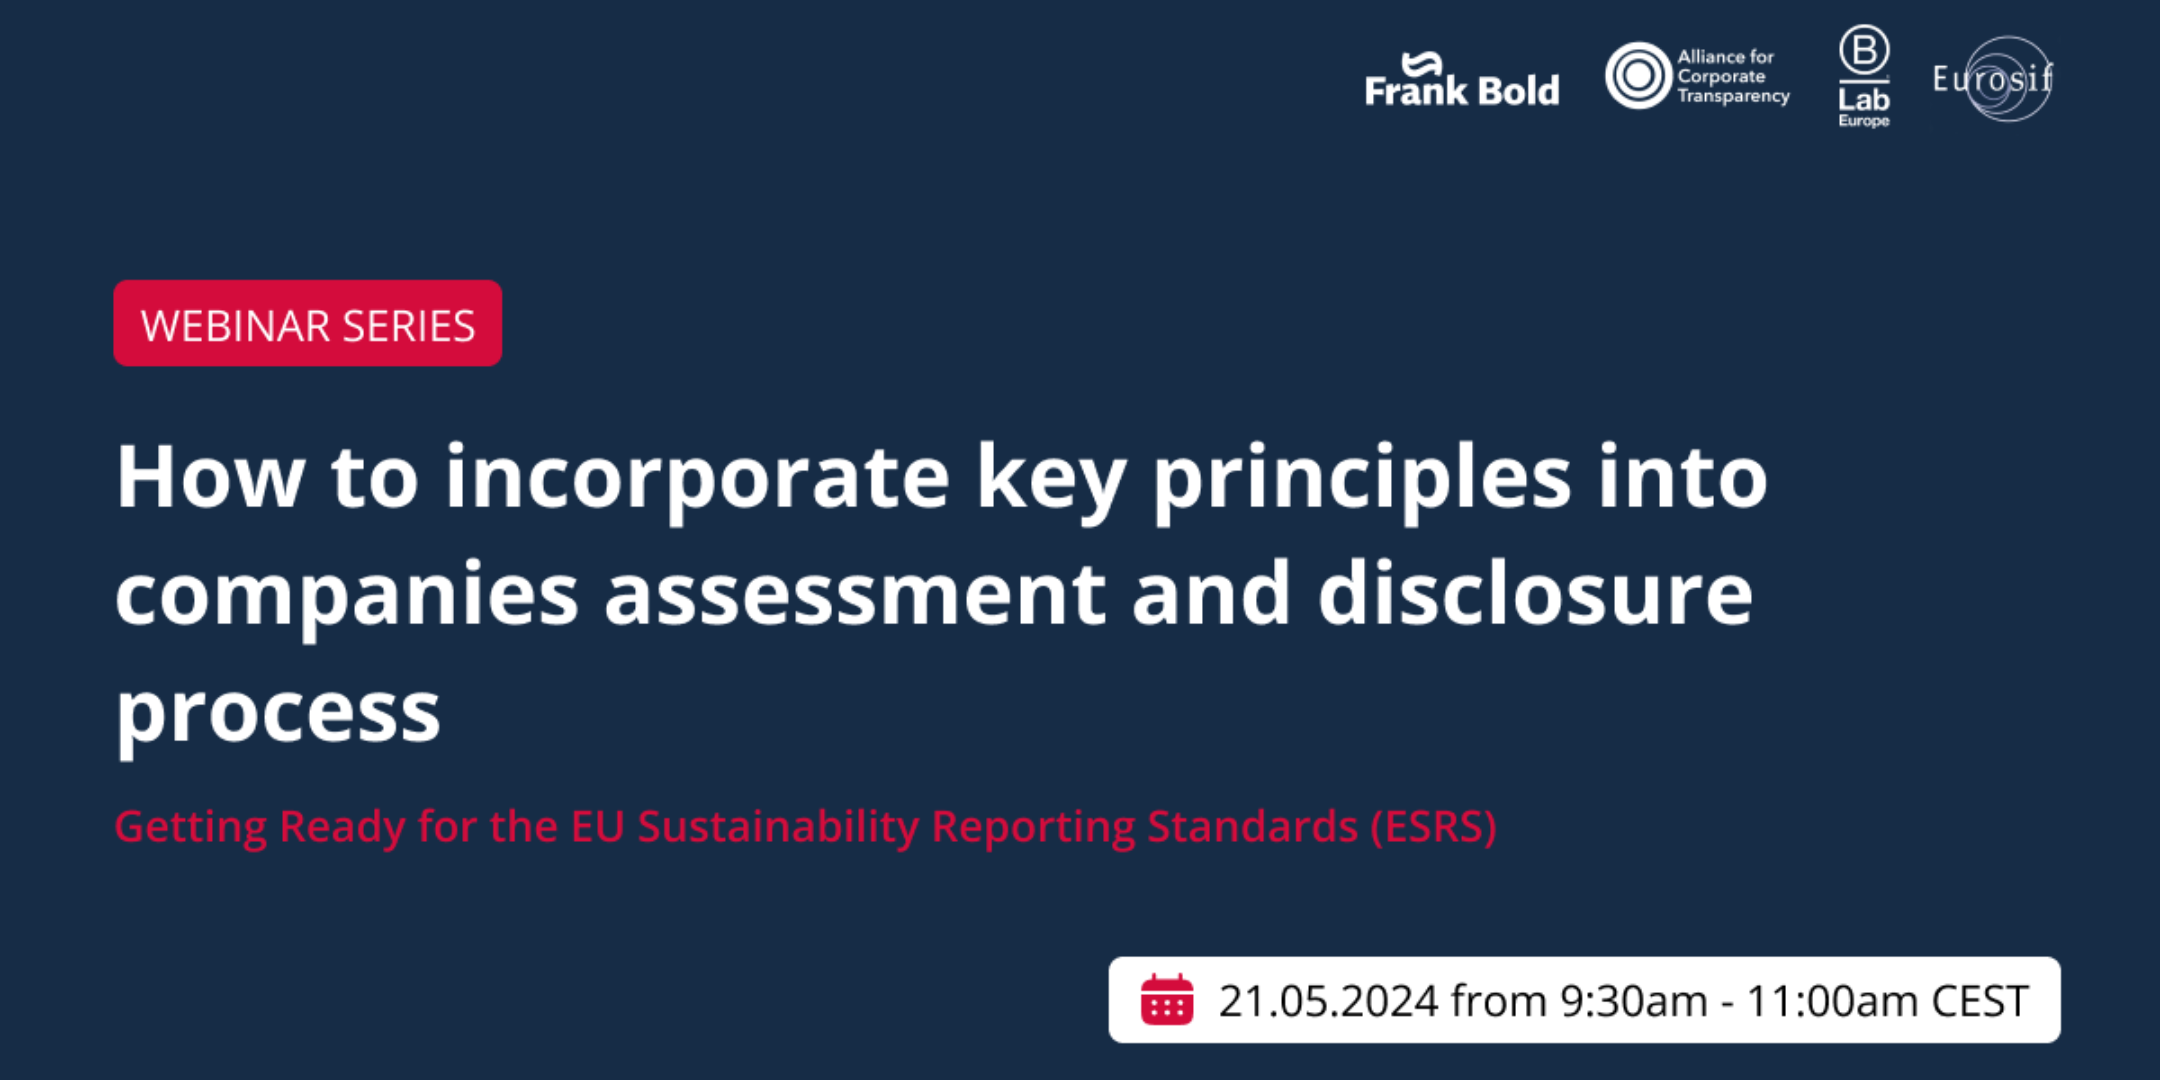 Getting Ready for the EU Sustainability Reporting Standards